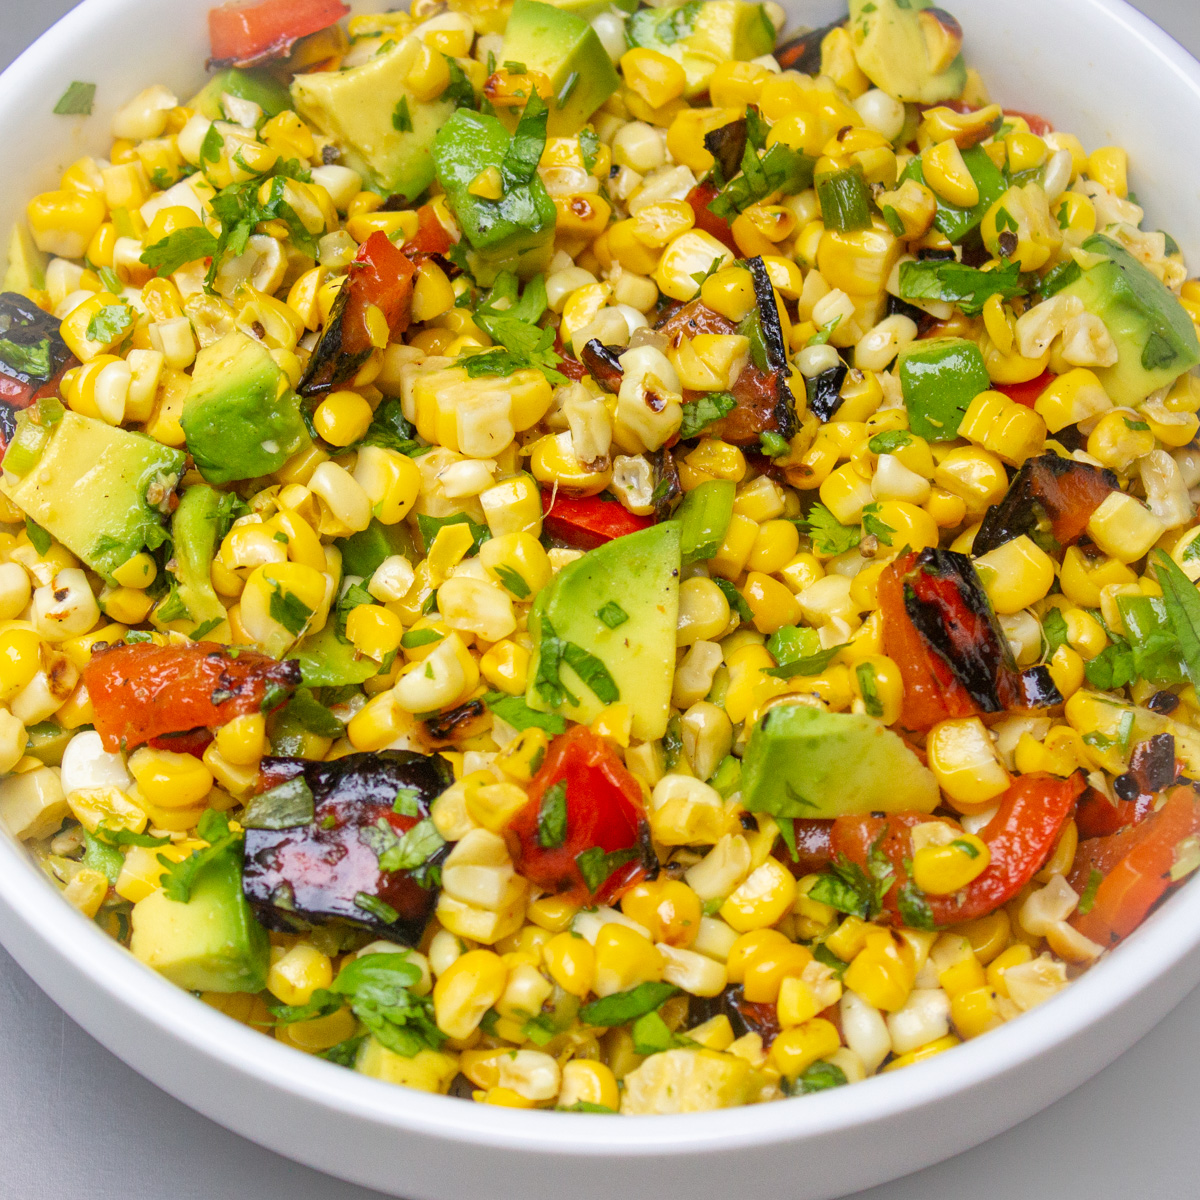 charred corn salad in a white bowl garnished with cilantro.